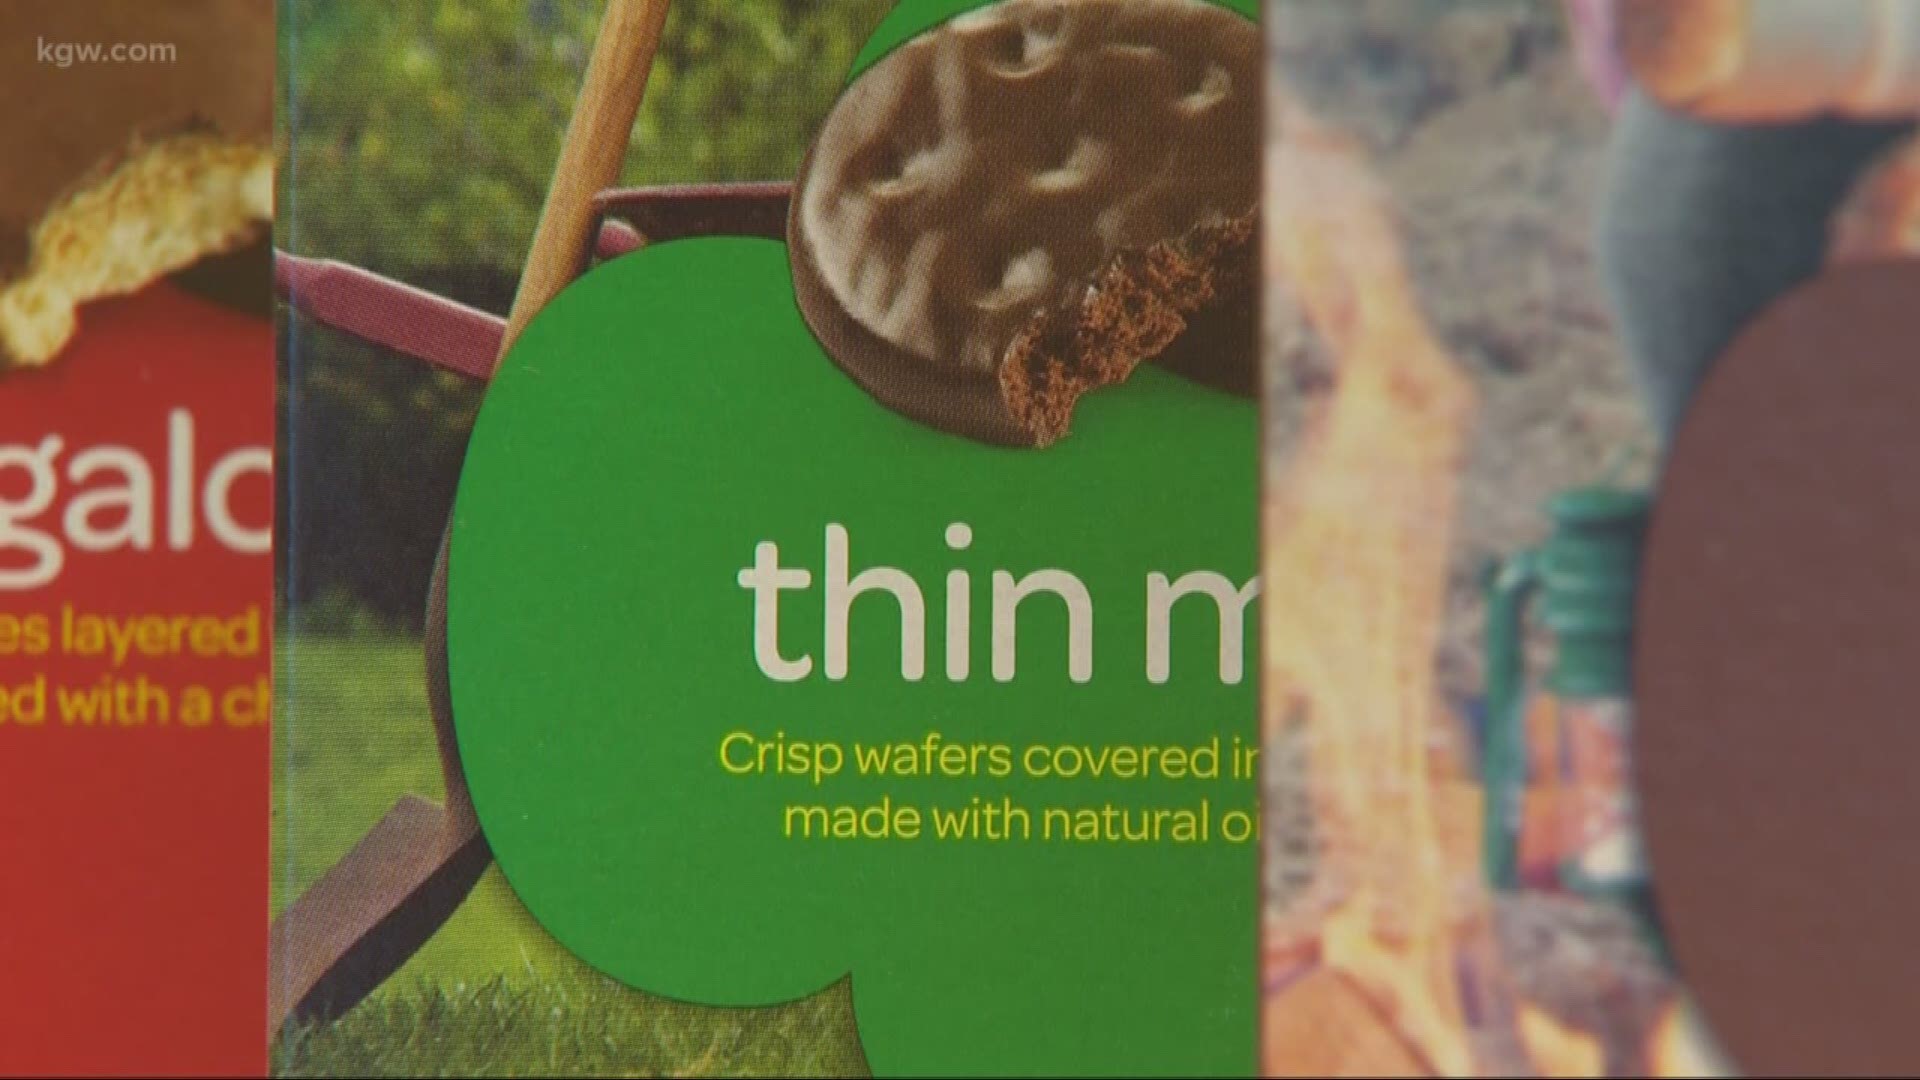 Going virtual. The Girl Scouts are going online during the coronavirus pandemic.